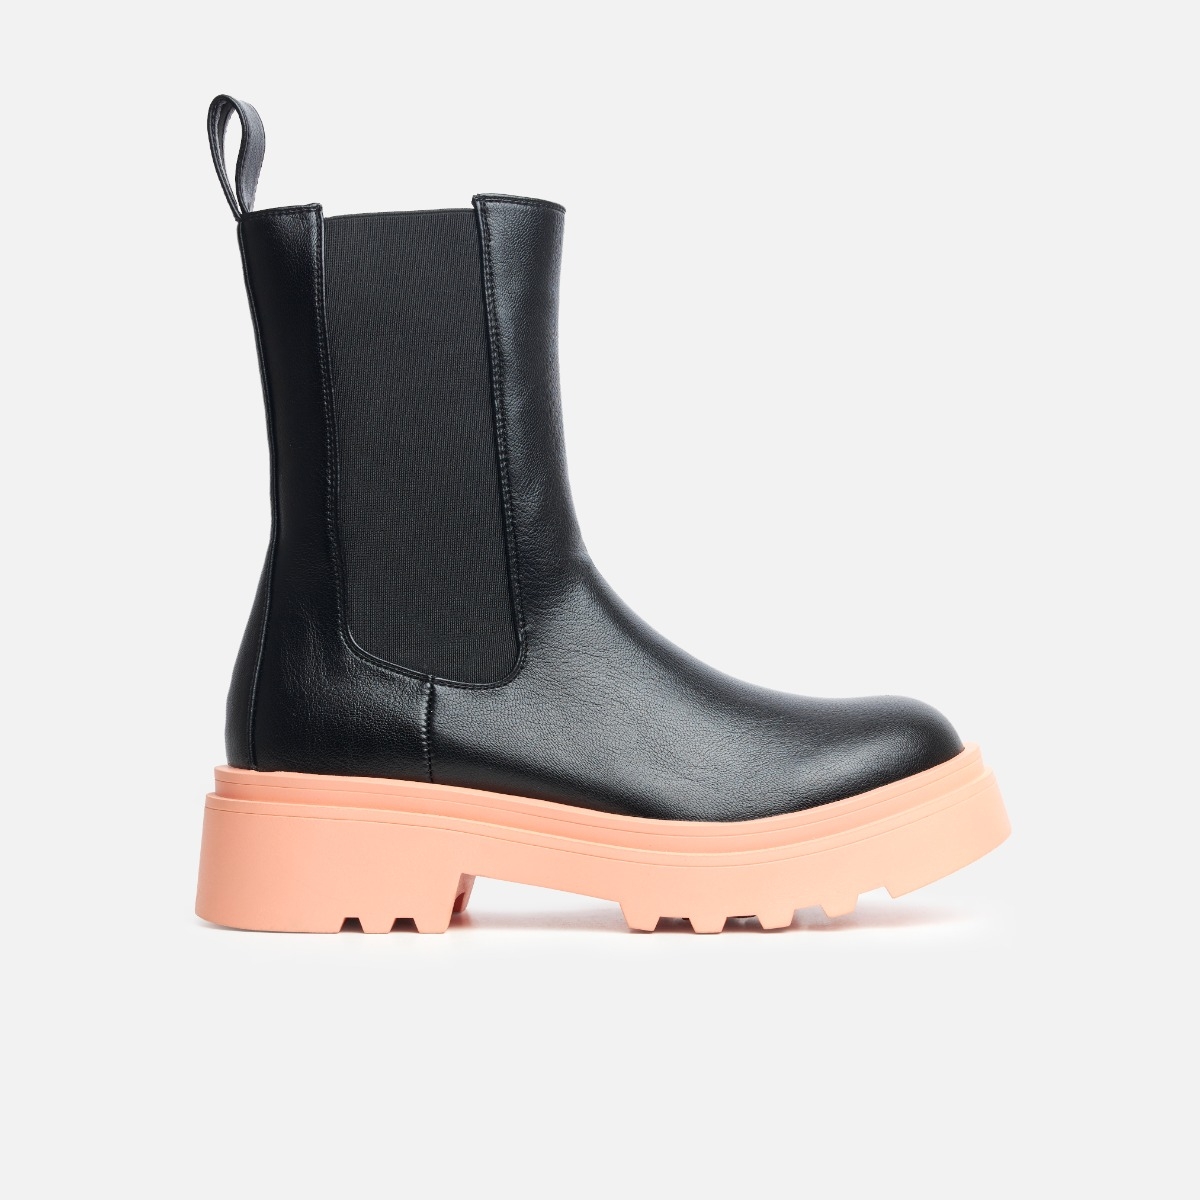 Joshua Black And Pink Stretch Insert Chunky Ankle Boots | SIMMI London